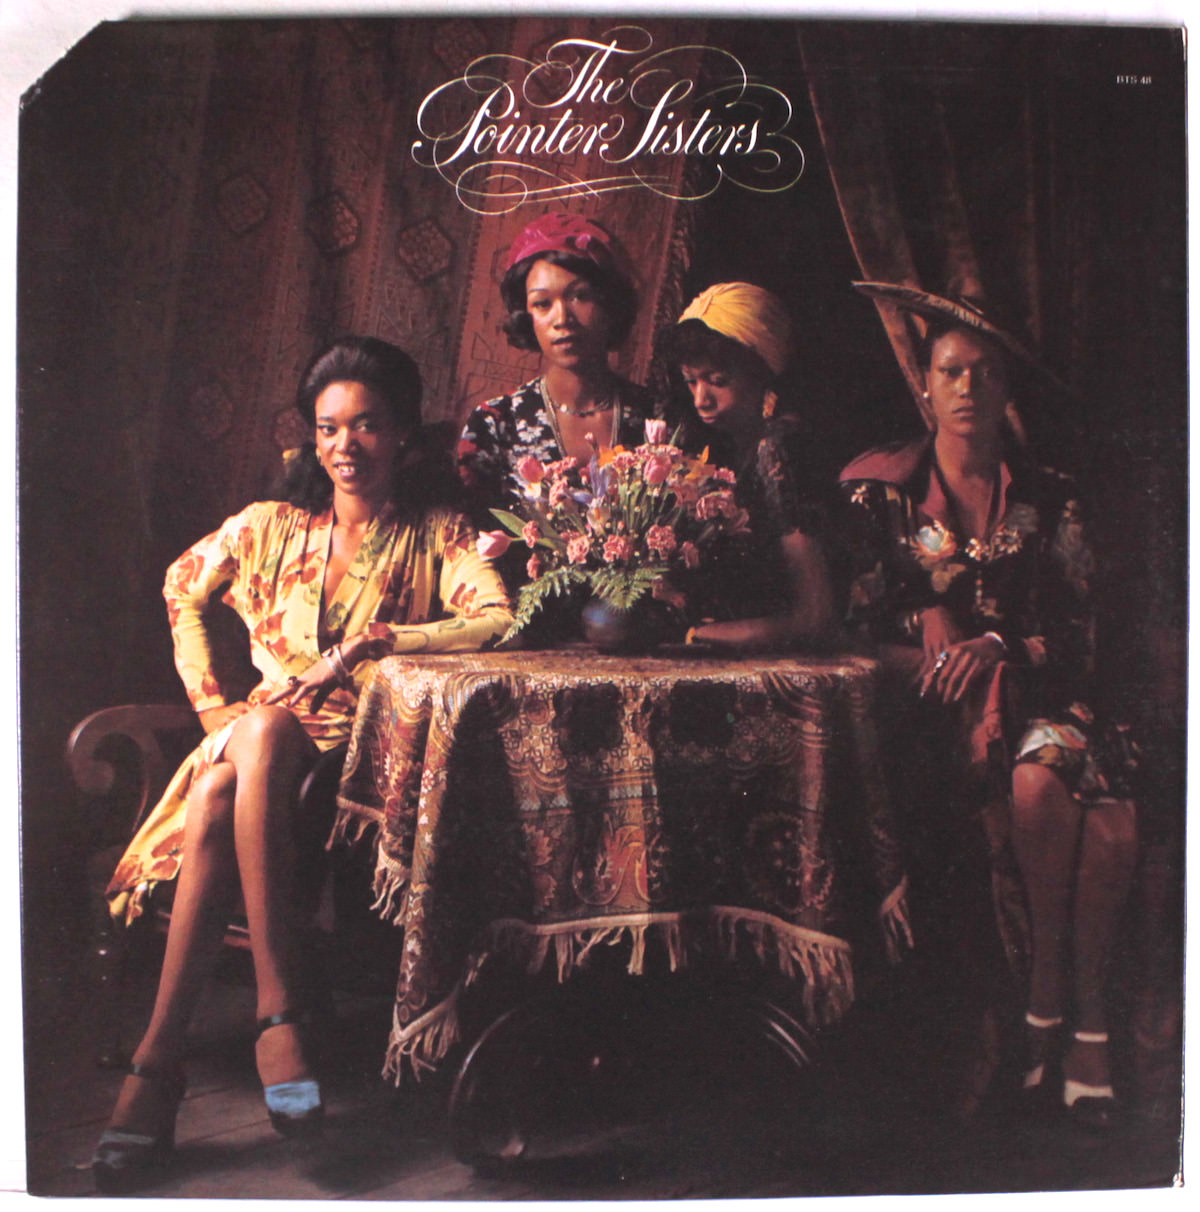 The Pointer Sisters wore Hudson’s designs on the sleeve of their 1973 Blue Thumb debut.